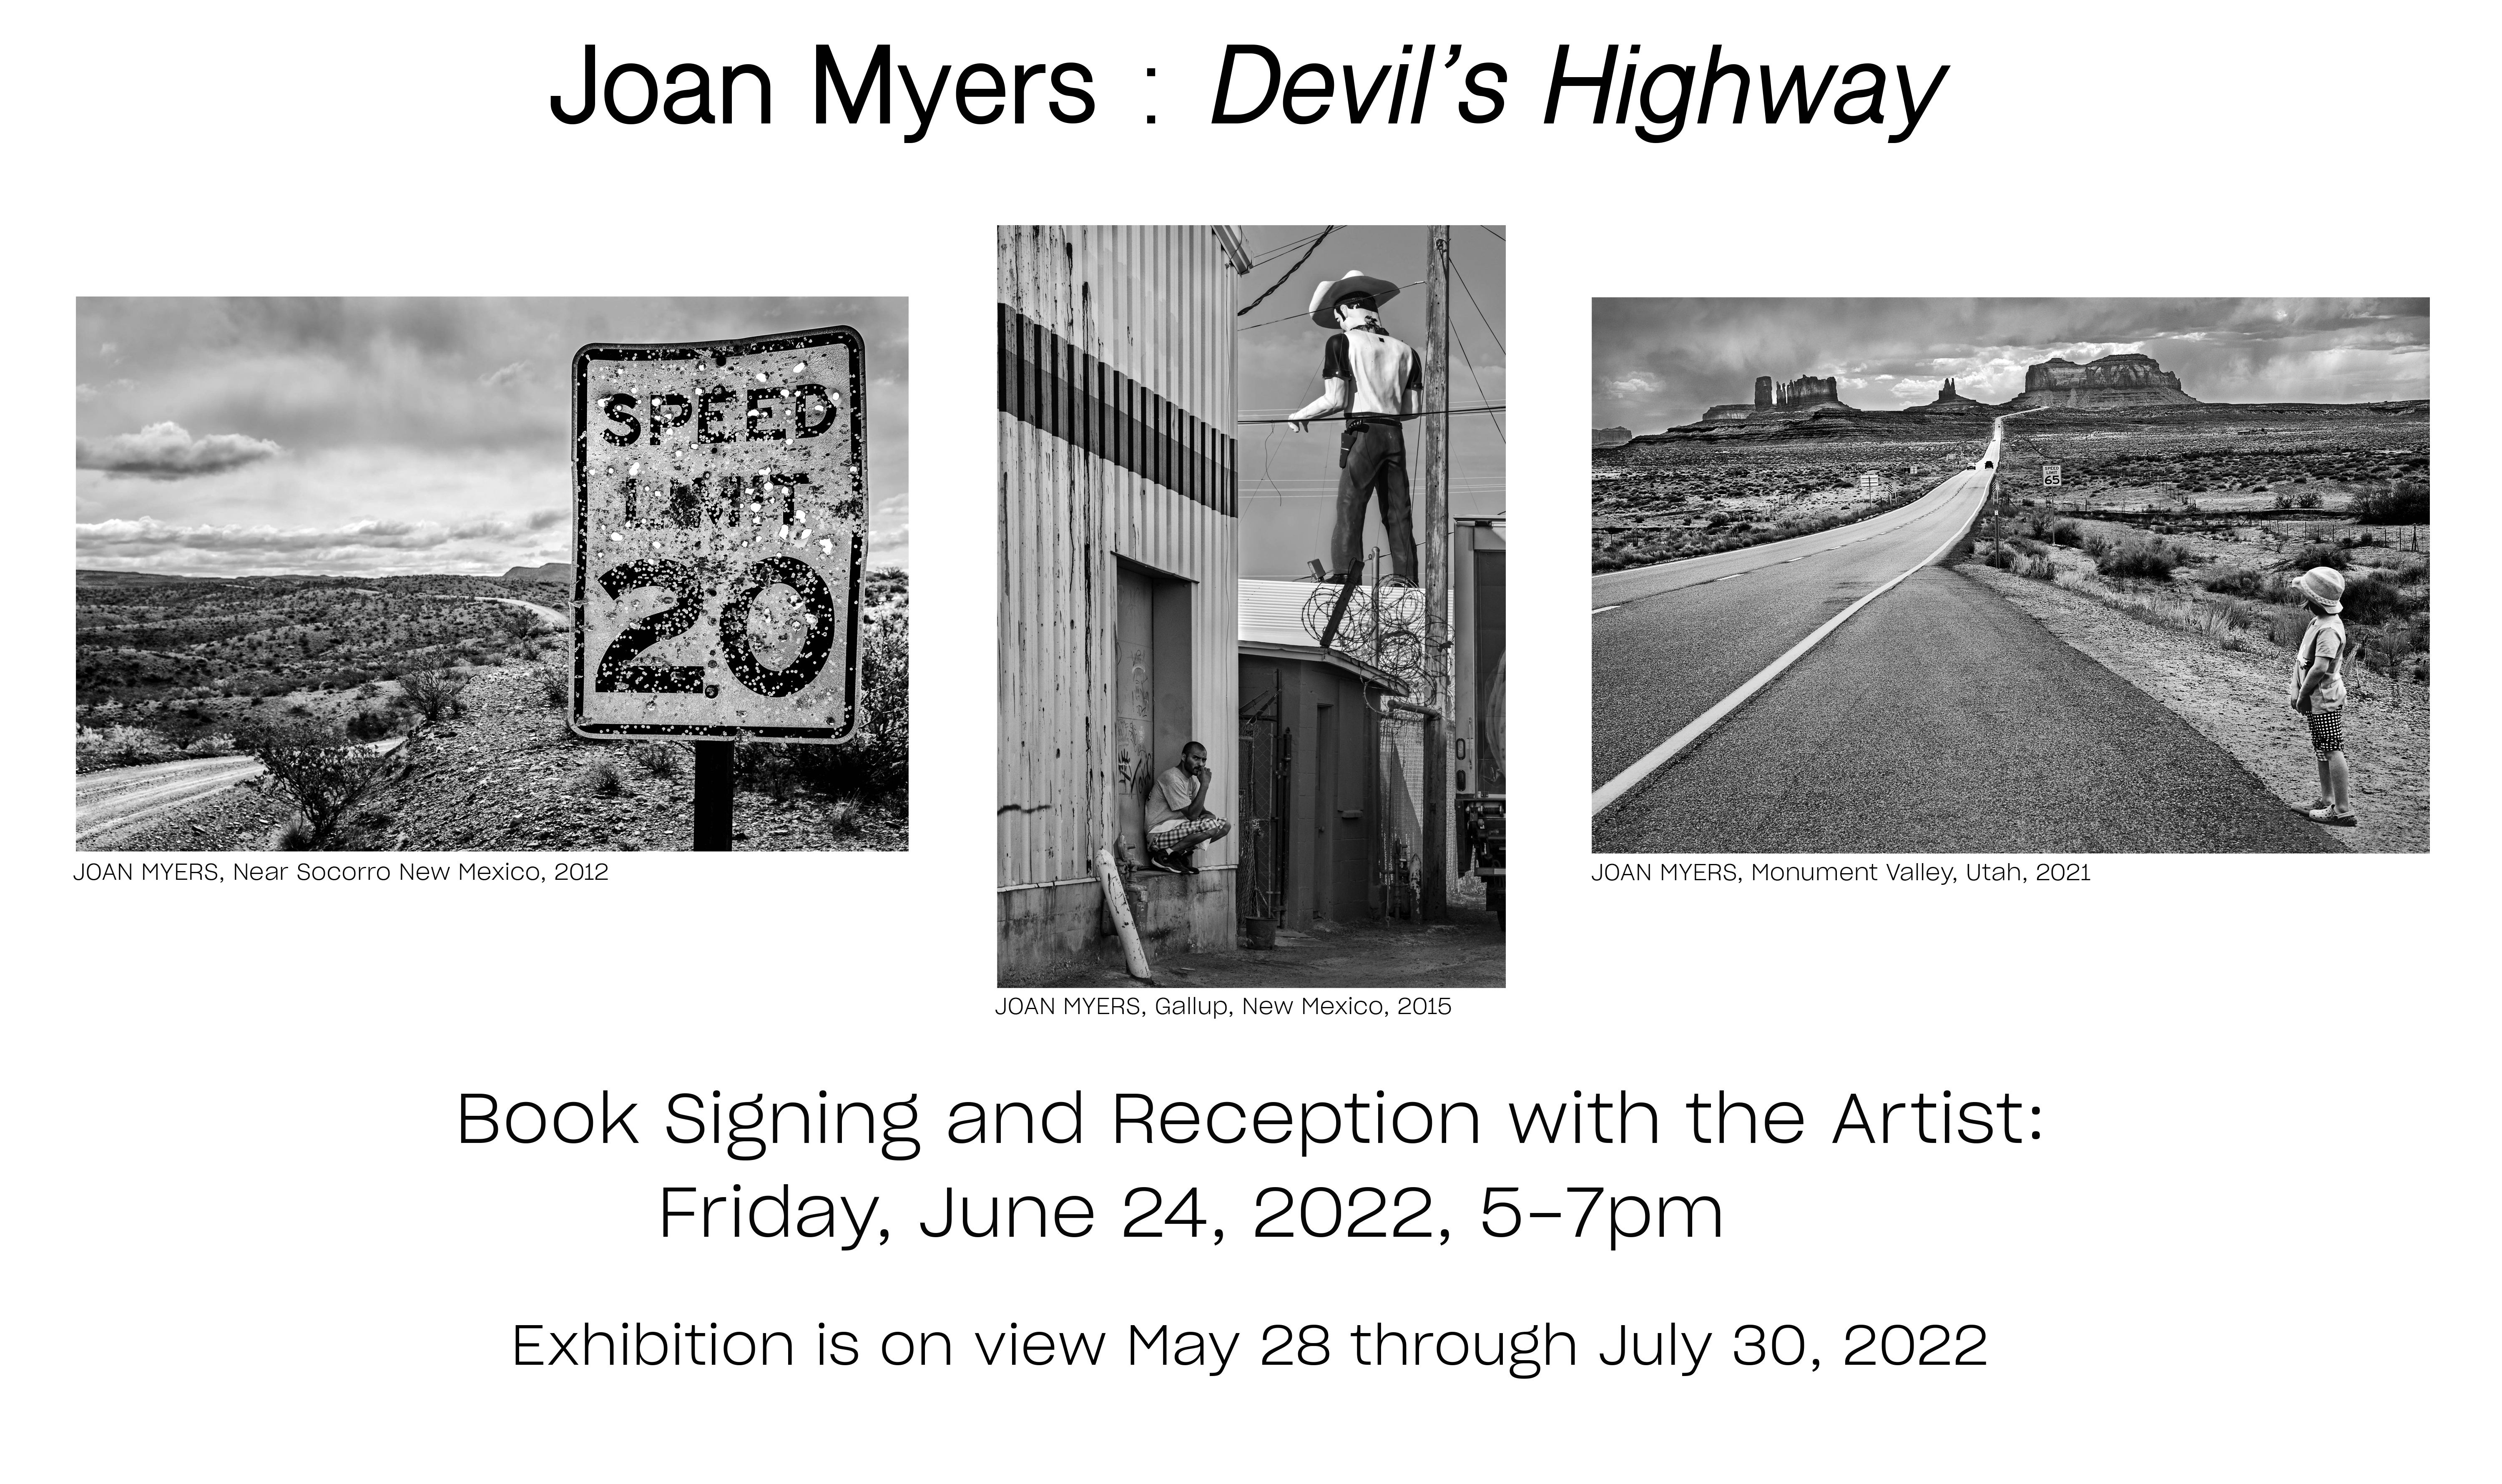 Joan Myers : Devil's Highwawy, Book signing and Reception with the artist, friday, june 24, 5-7pm. Exhibition is on view through july 30, 2022.